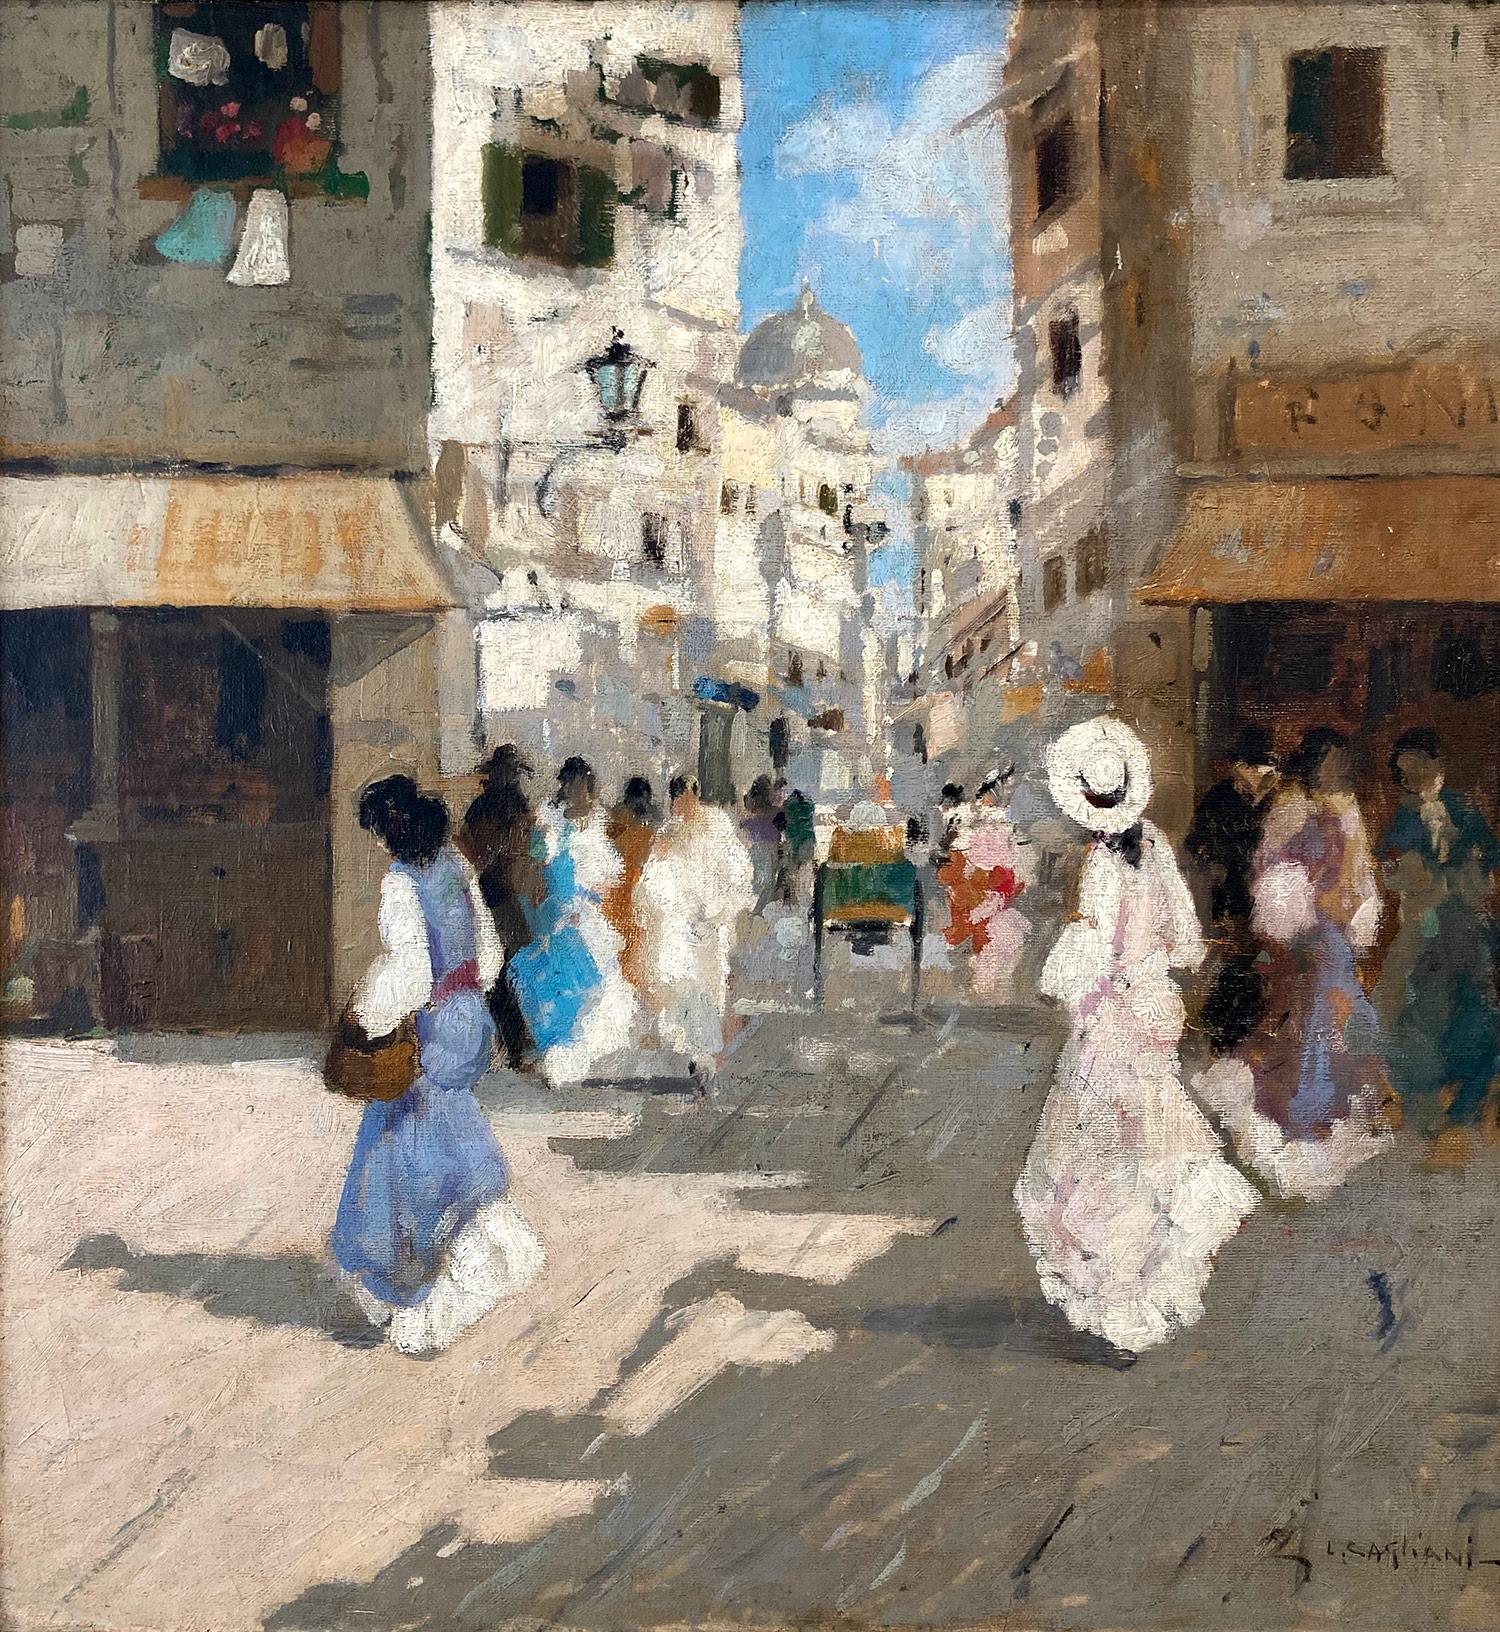 A whimsical oil painting depicting a Street Scene in Venice of people going about their day by Luigi Cagliani. As an Italian Impressionist artist, most of Cagliani's works were produced in the first half of the 20th Century. He was known for his